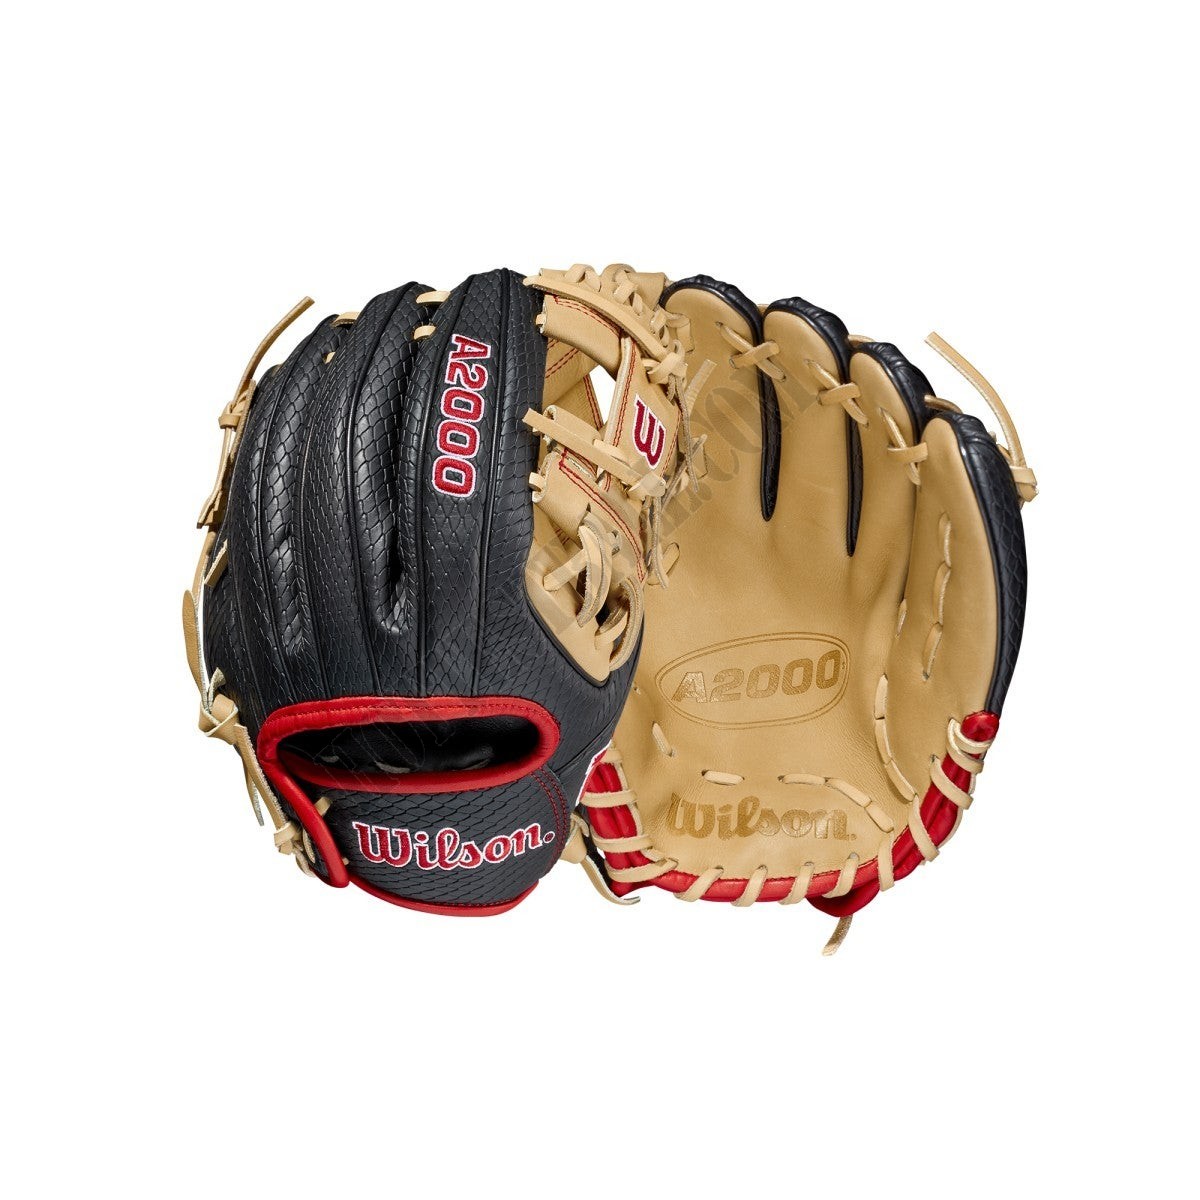 2021 A2000 PF88SS 11.25" Pedroia Fit Infield Baseball Glove ● Wilson Promotions - 2021 A2000 PF88SS 11.25" Pedroia Fit Infield Baseball Glove ● Wilson Promotions